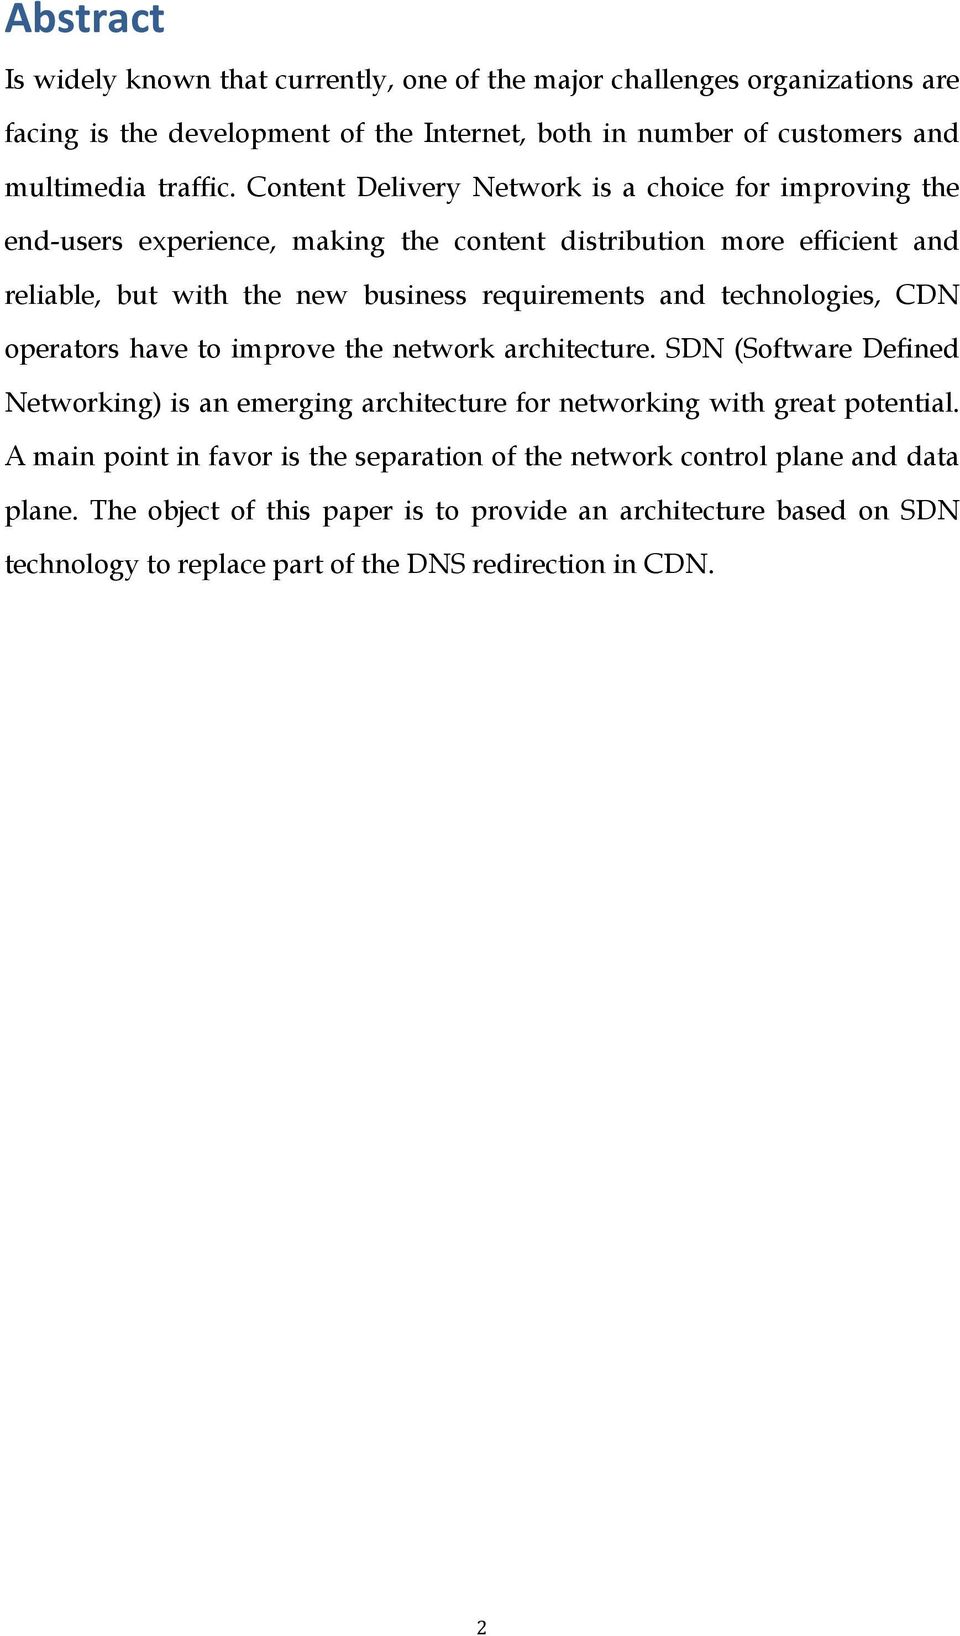 technologies, CDN operators have to improve the network architecture. SDN (Software Defined Networking) is an emerging architecture for networking with great potential.